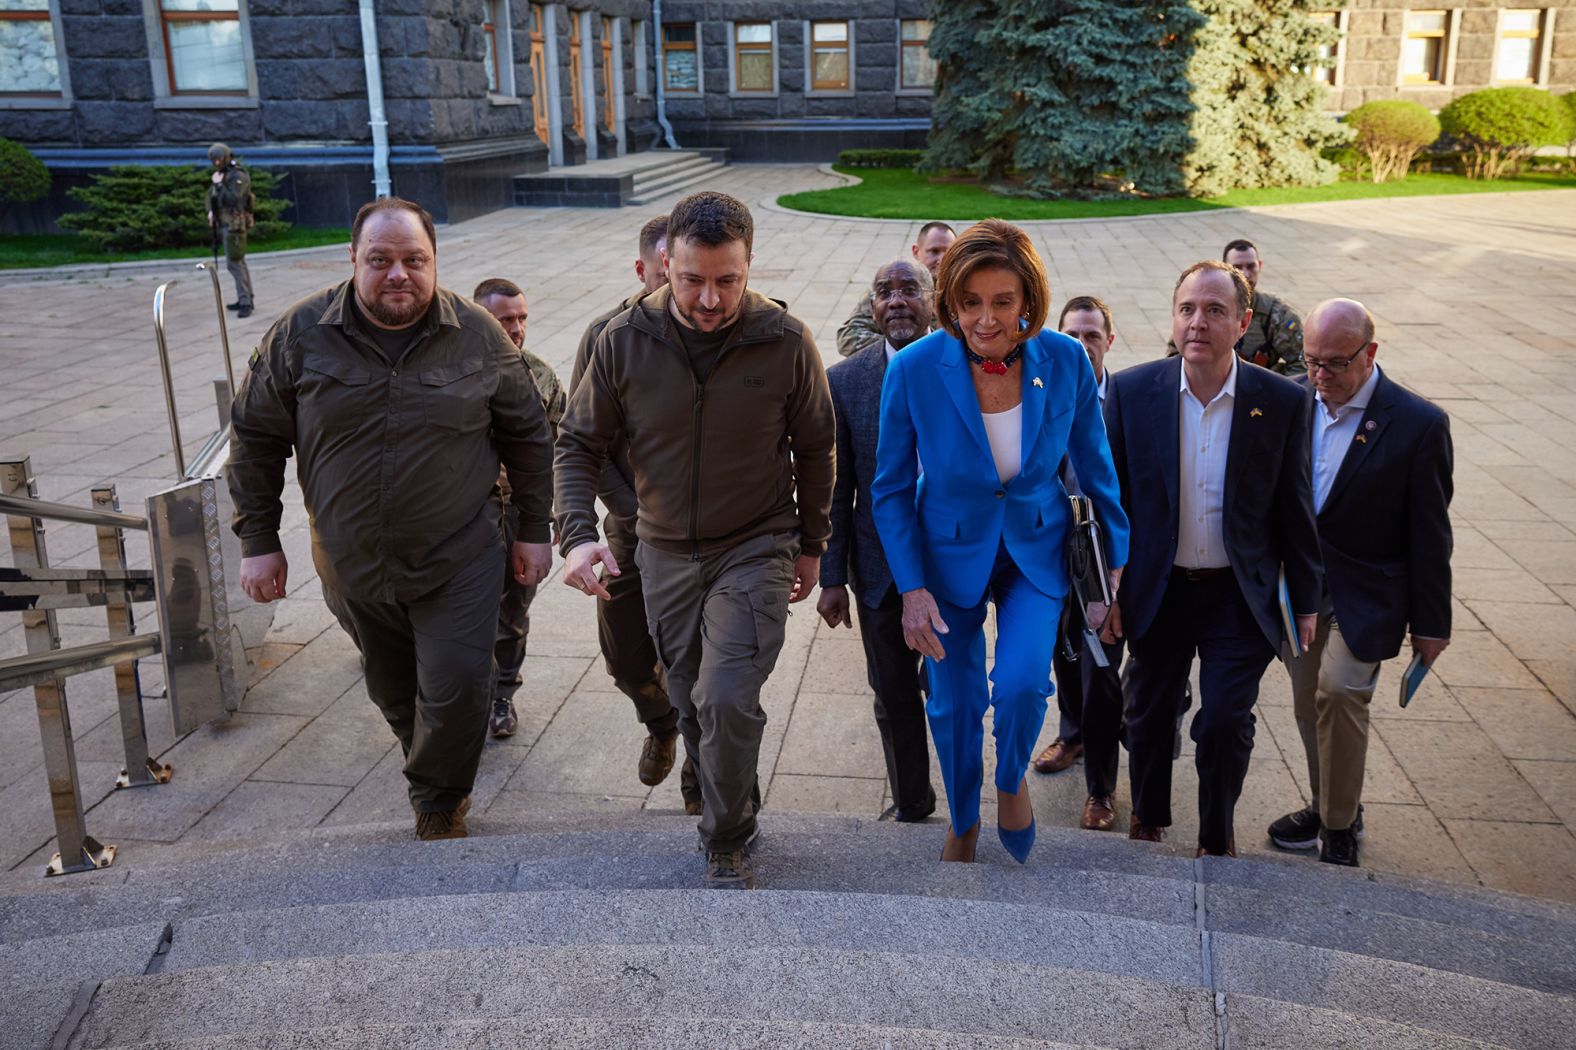 Ukrainian President Volodymyr Zelensky, center, meets with US House Speaker Nancy Pelosi as a congressional delegation visited Kyiv on April 30. Pelosi is <a href="index.php?page=&url=https%3A%2F%2Fwww.cnn.com%2F2022%2F05%2F01%2Fpolitics%2Fpelosi-zelensky-kyiv-ukraine-intl%2Findex.html" target="_blank">the most senior US official to meet with Zelensky</a> since Russia invaded Ukraine.